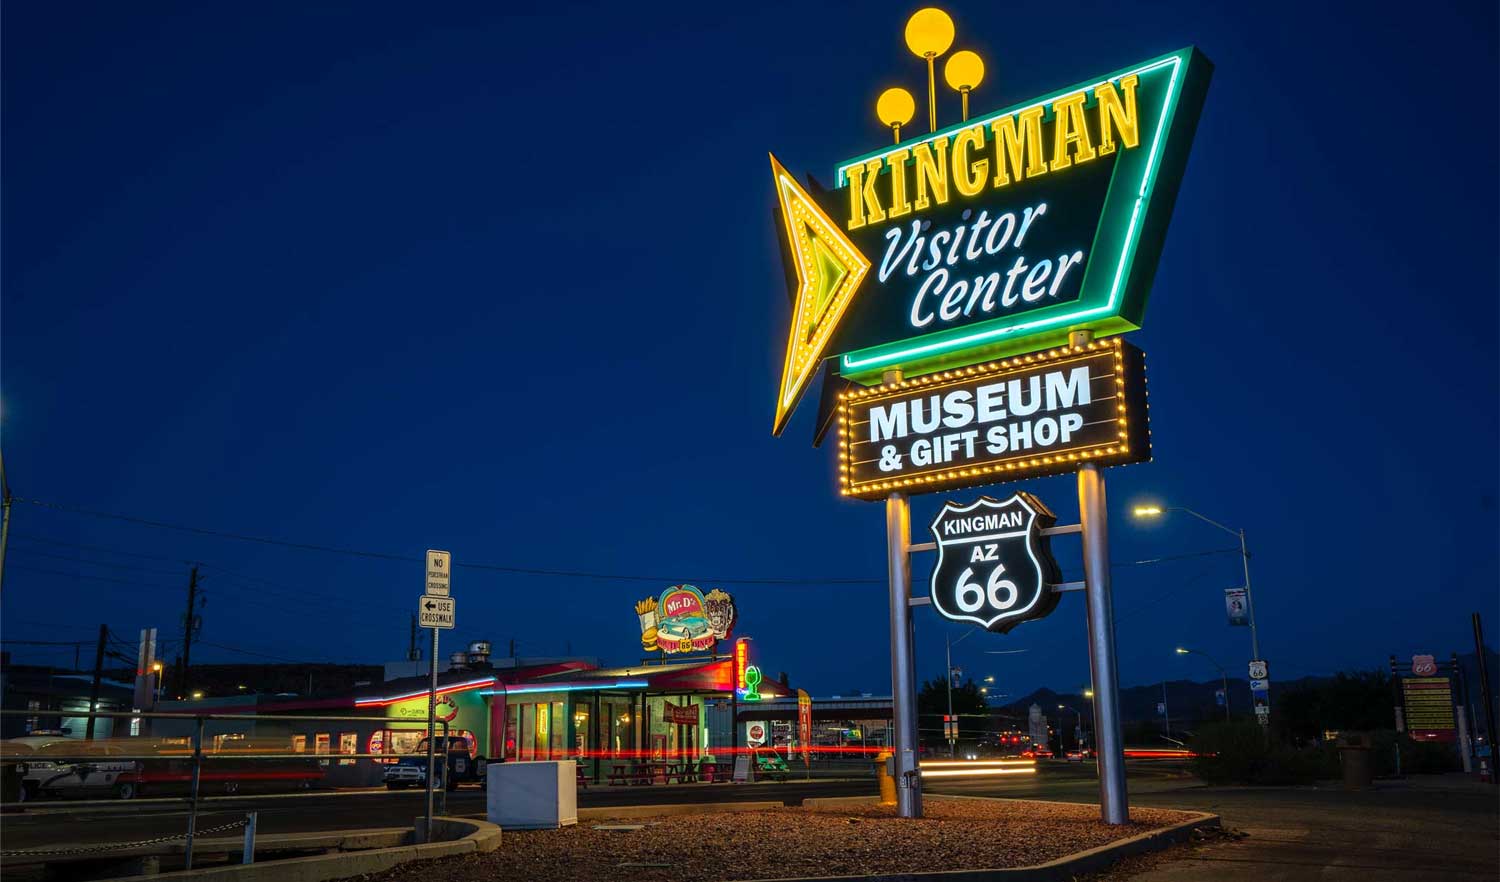 kingman visitor center and neon sign at dusk